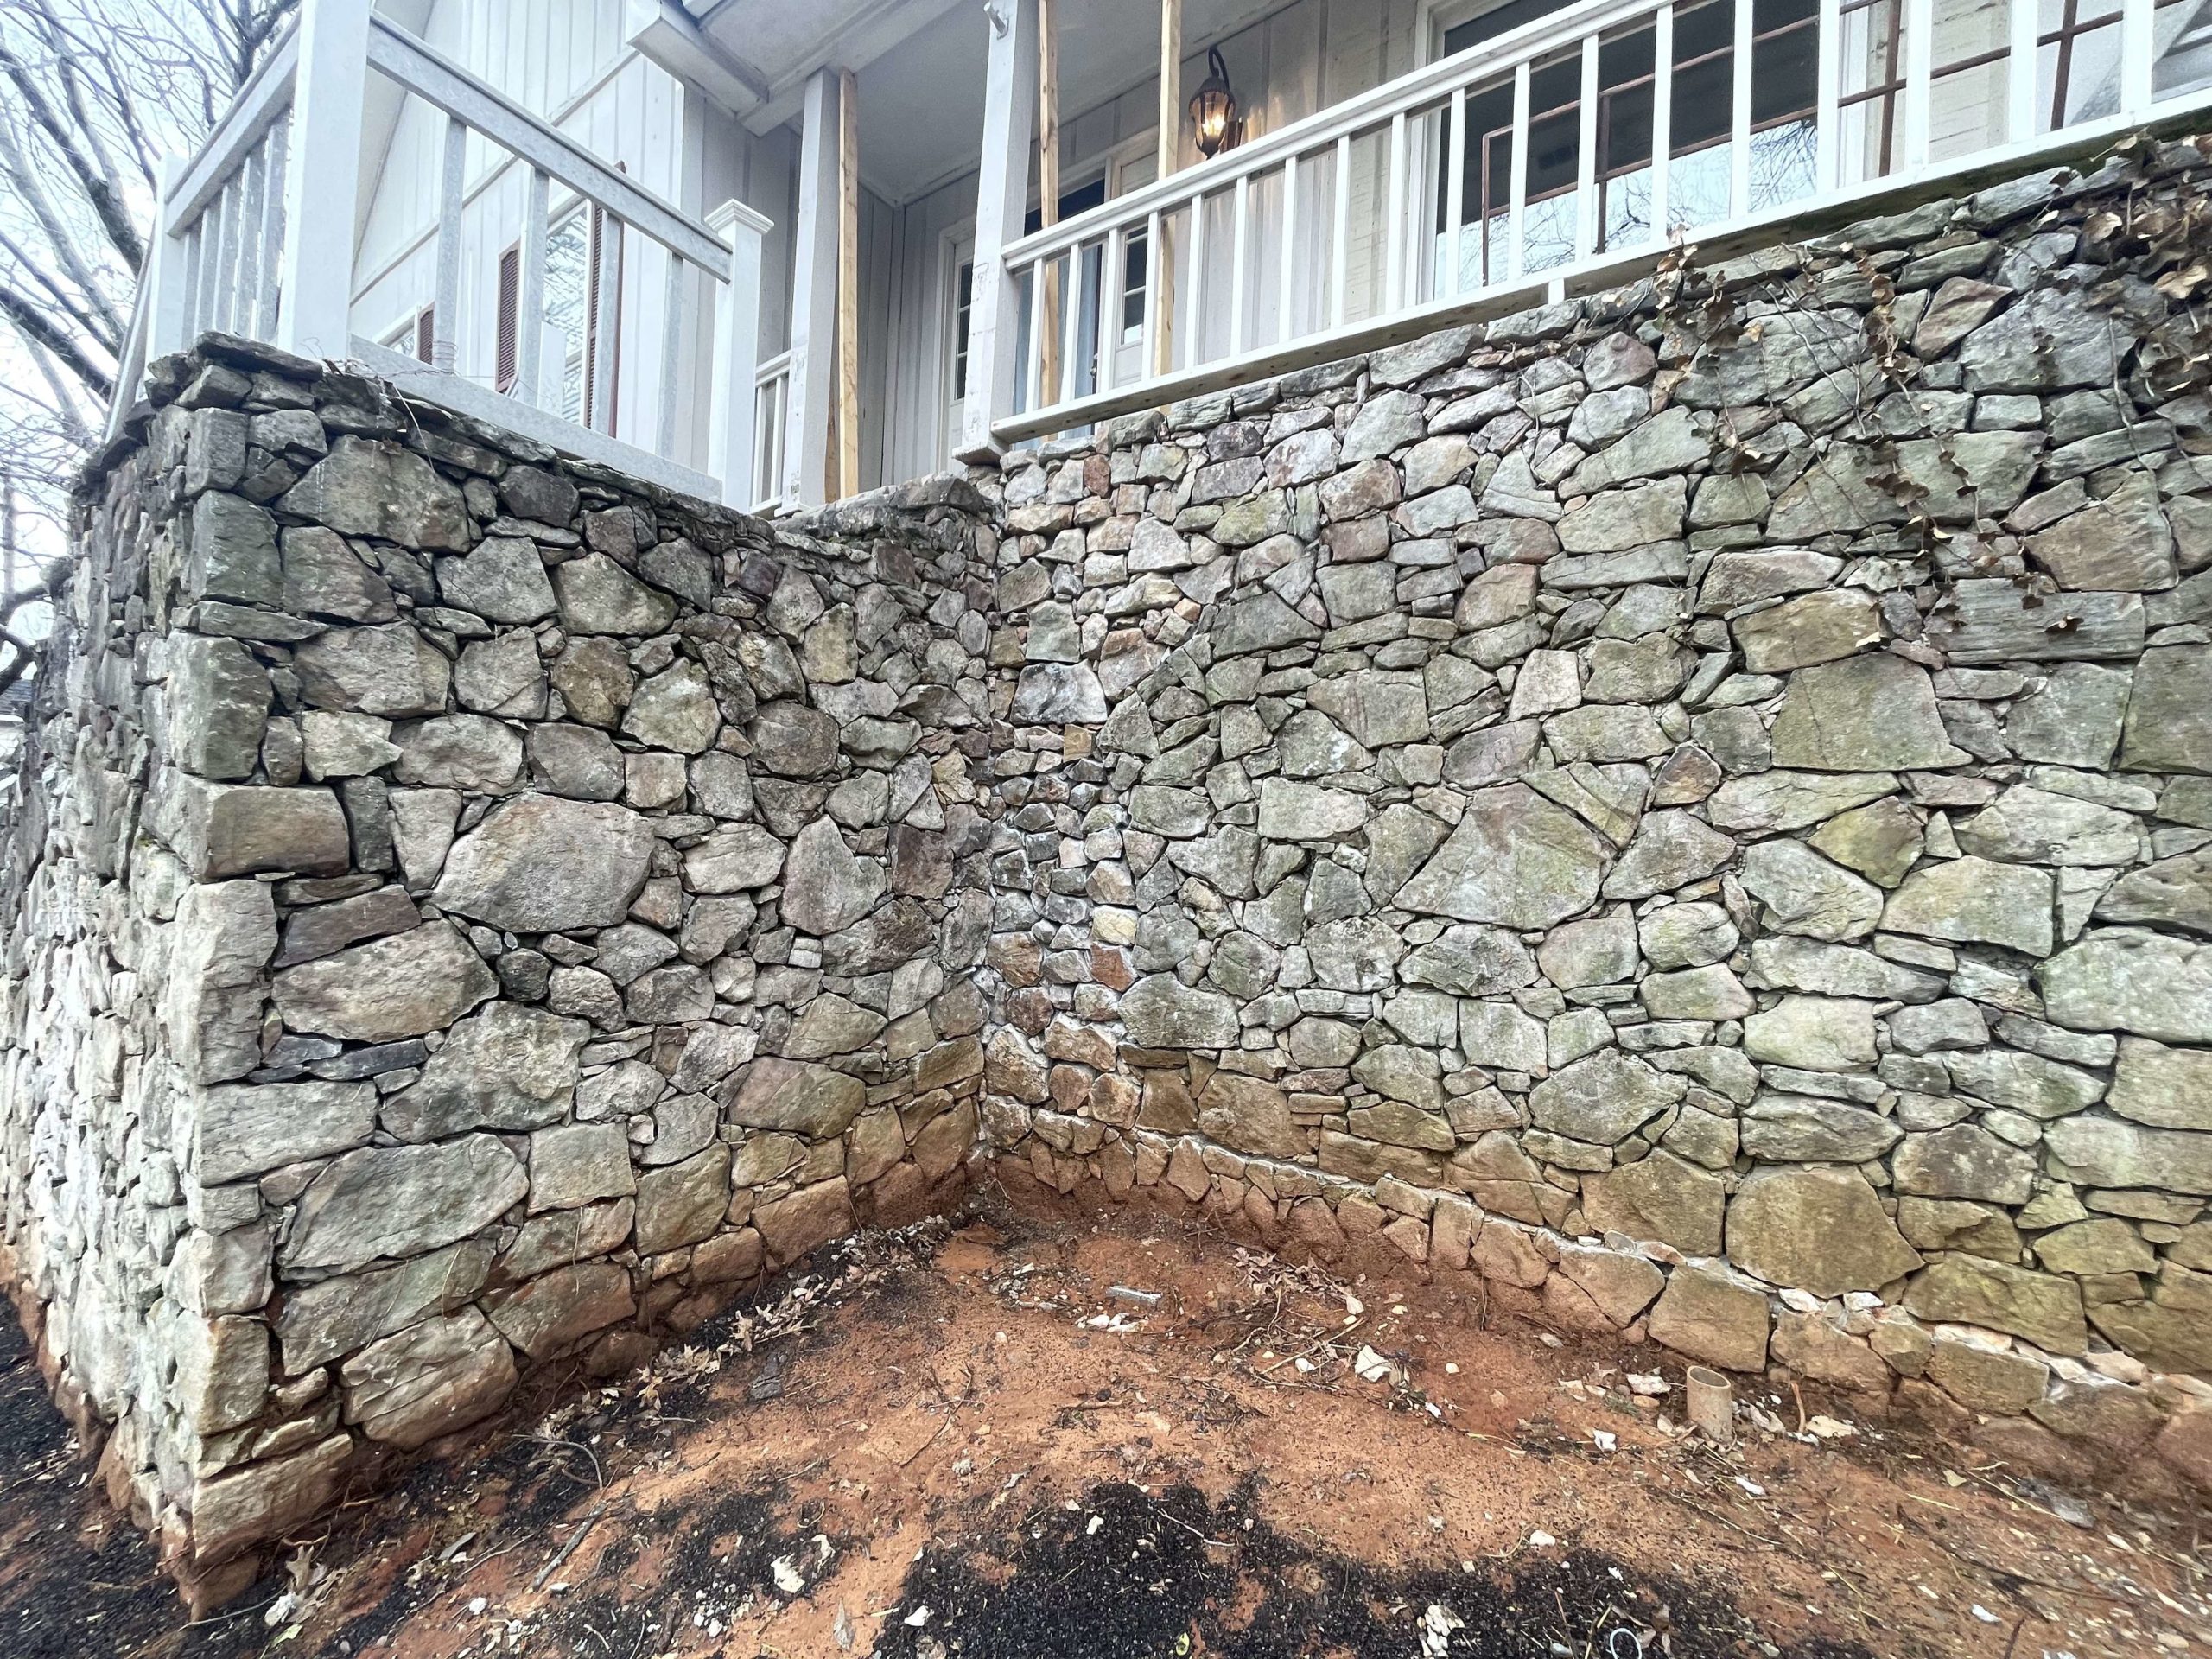 Foundation Stabilization And Porch Realignment Using Helical Piers In Huntsville, Al | Foundation wall